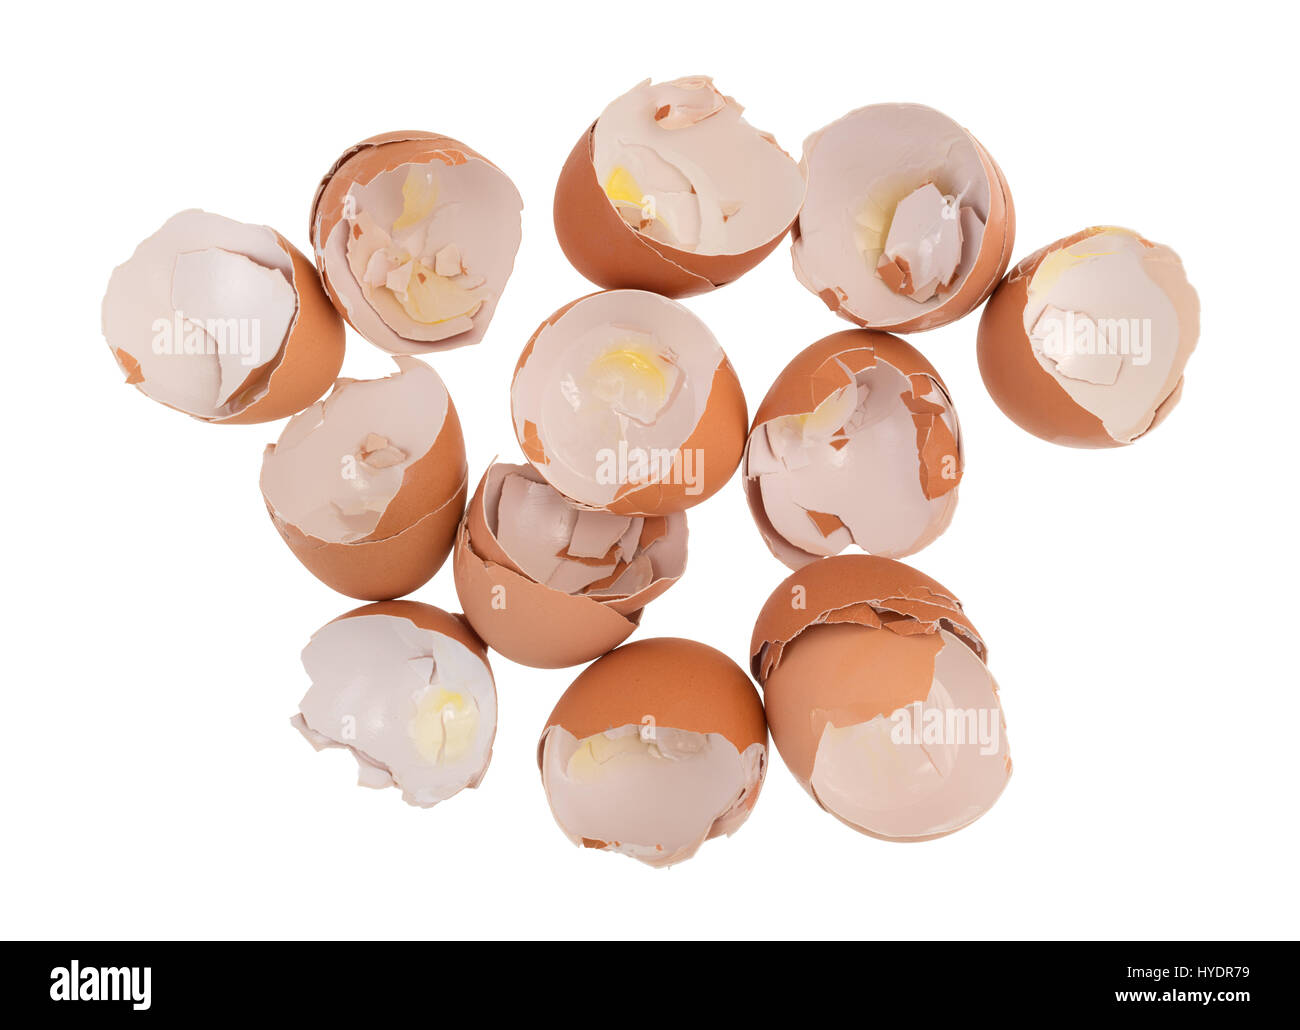 Top view of a dozen cracked open and used egg shells isolated on a white background. Stock Photo